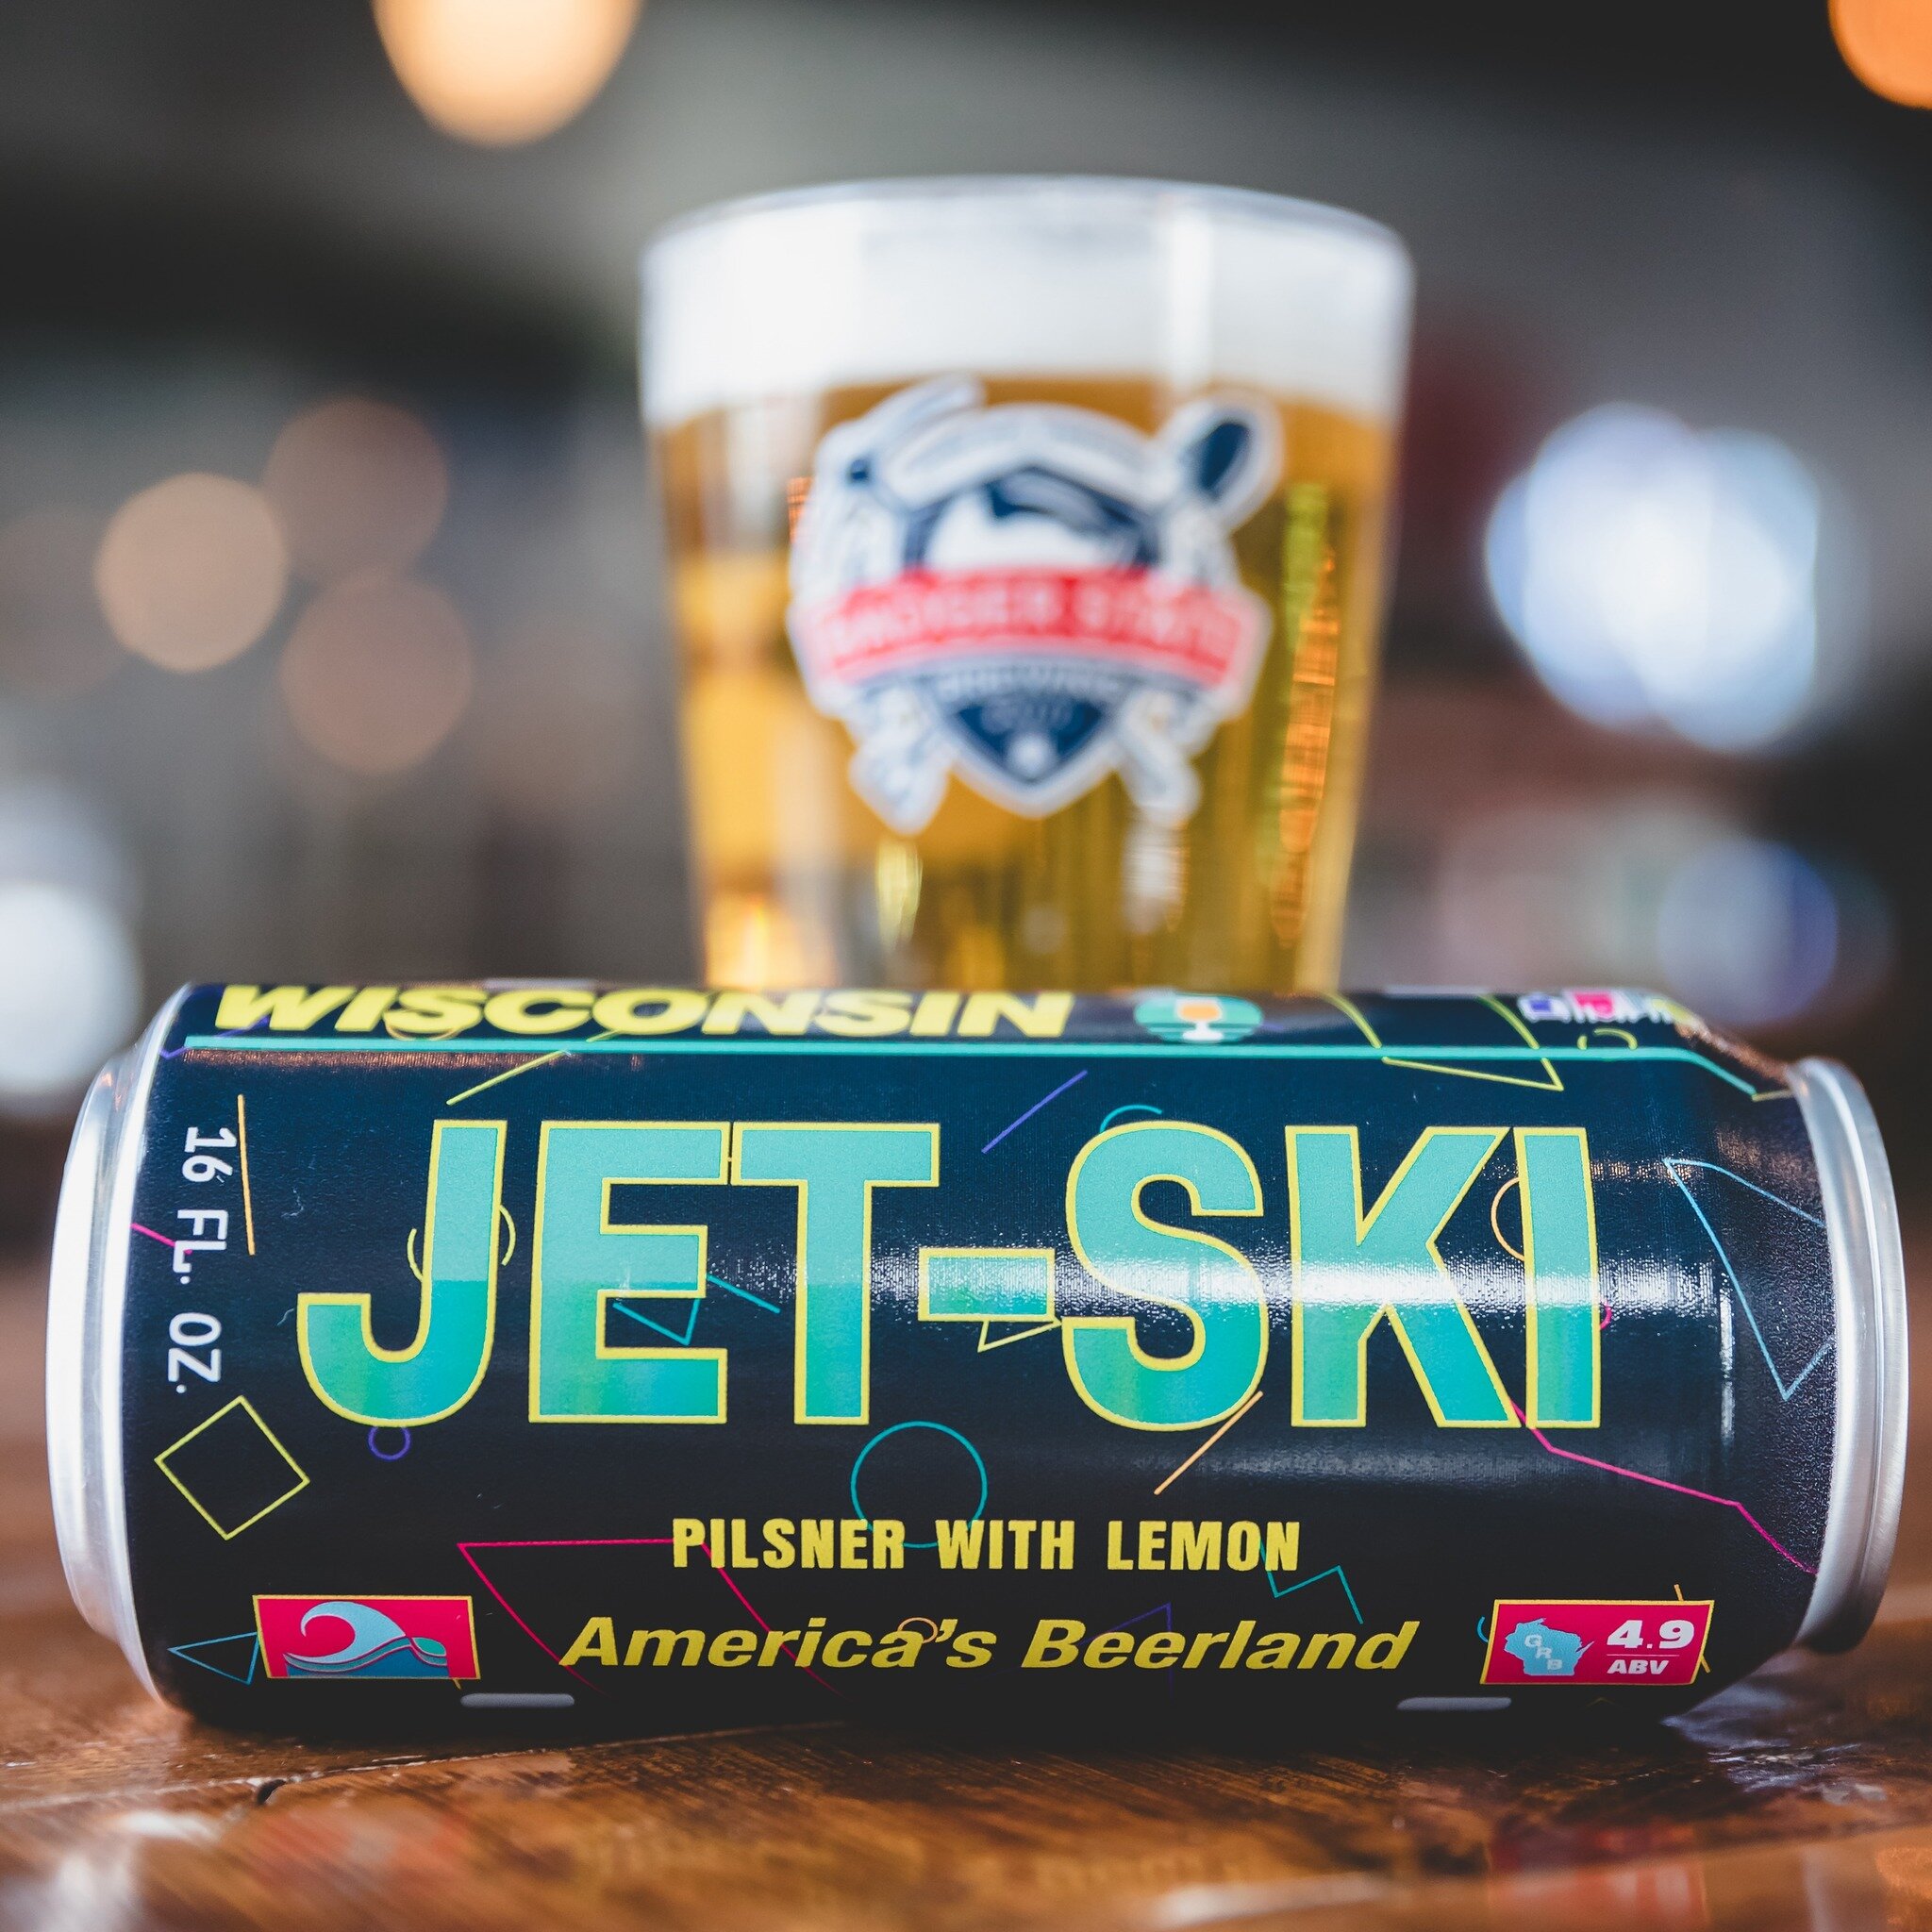 JET-SKI is joining the SKI family of brands and launching Statewide beginning this Thursday, March 21st. Is it a little early to get your ski on out by the lake? Perhaps. It&rsquo;s not too early to start thinking warm summer thoughts about our Germa